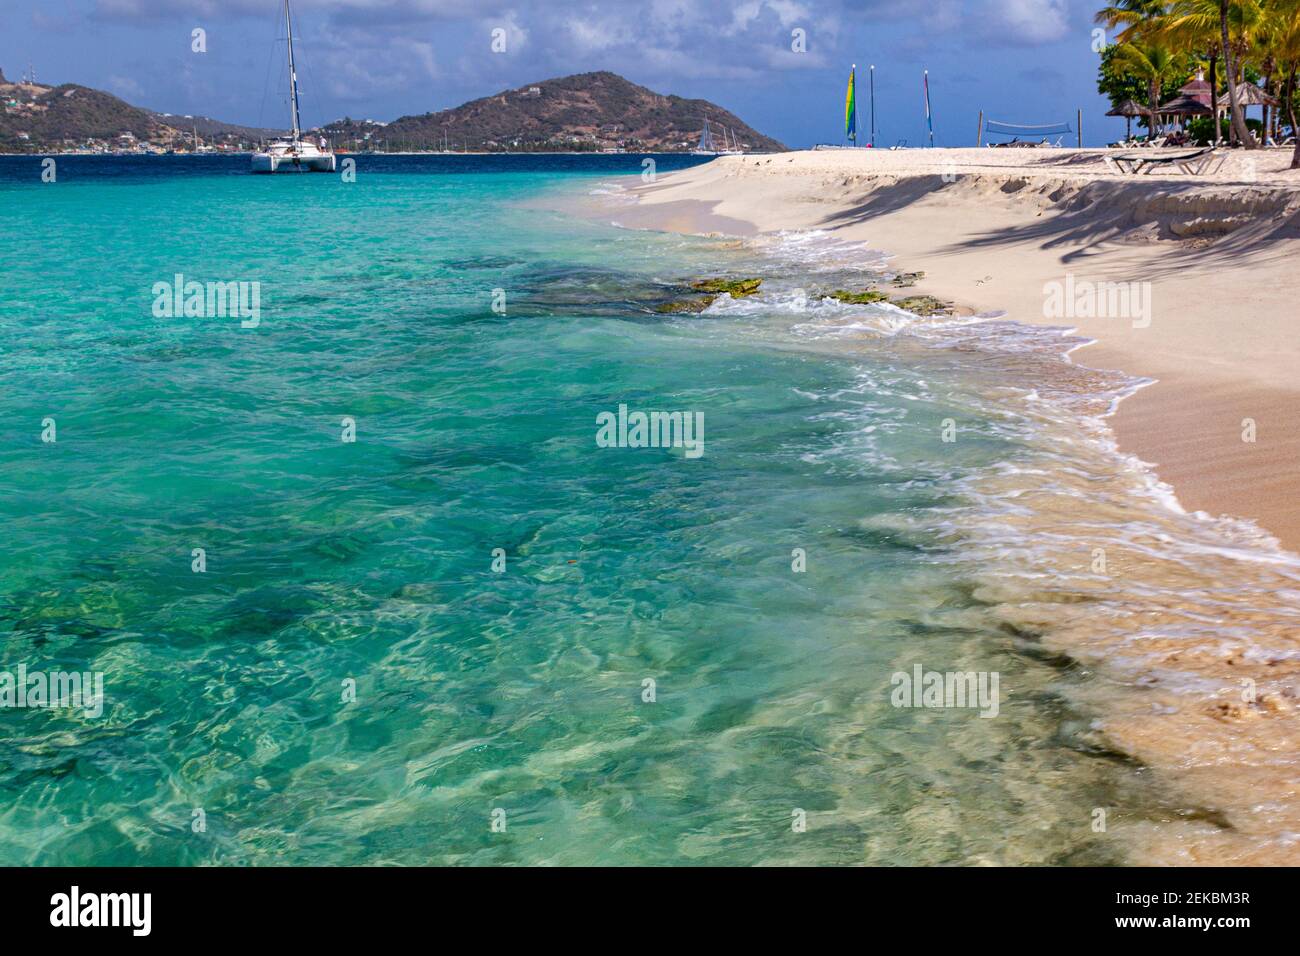 Palm Island Waters Edge-View of Casuarina Beach With Turquoise Caribbean Sea, Gentle Waves, Palm Trees, Yachts and Union island with Blue Sky #2 Stock Photo